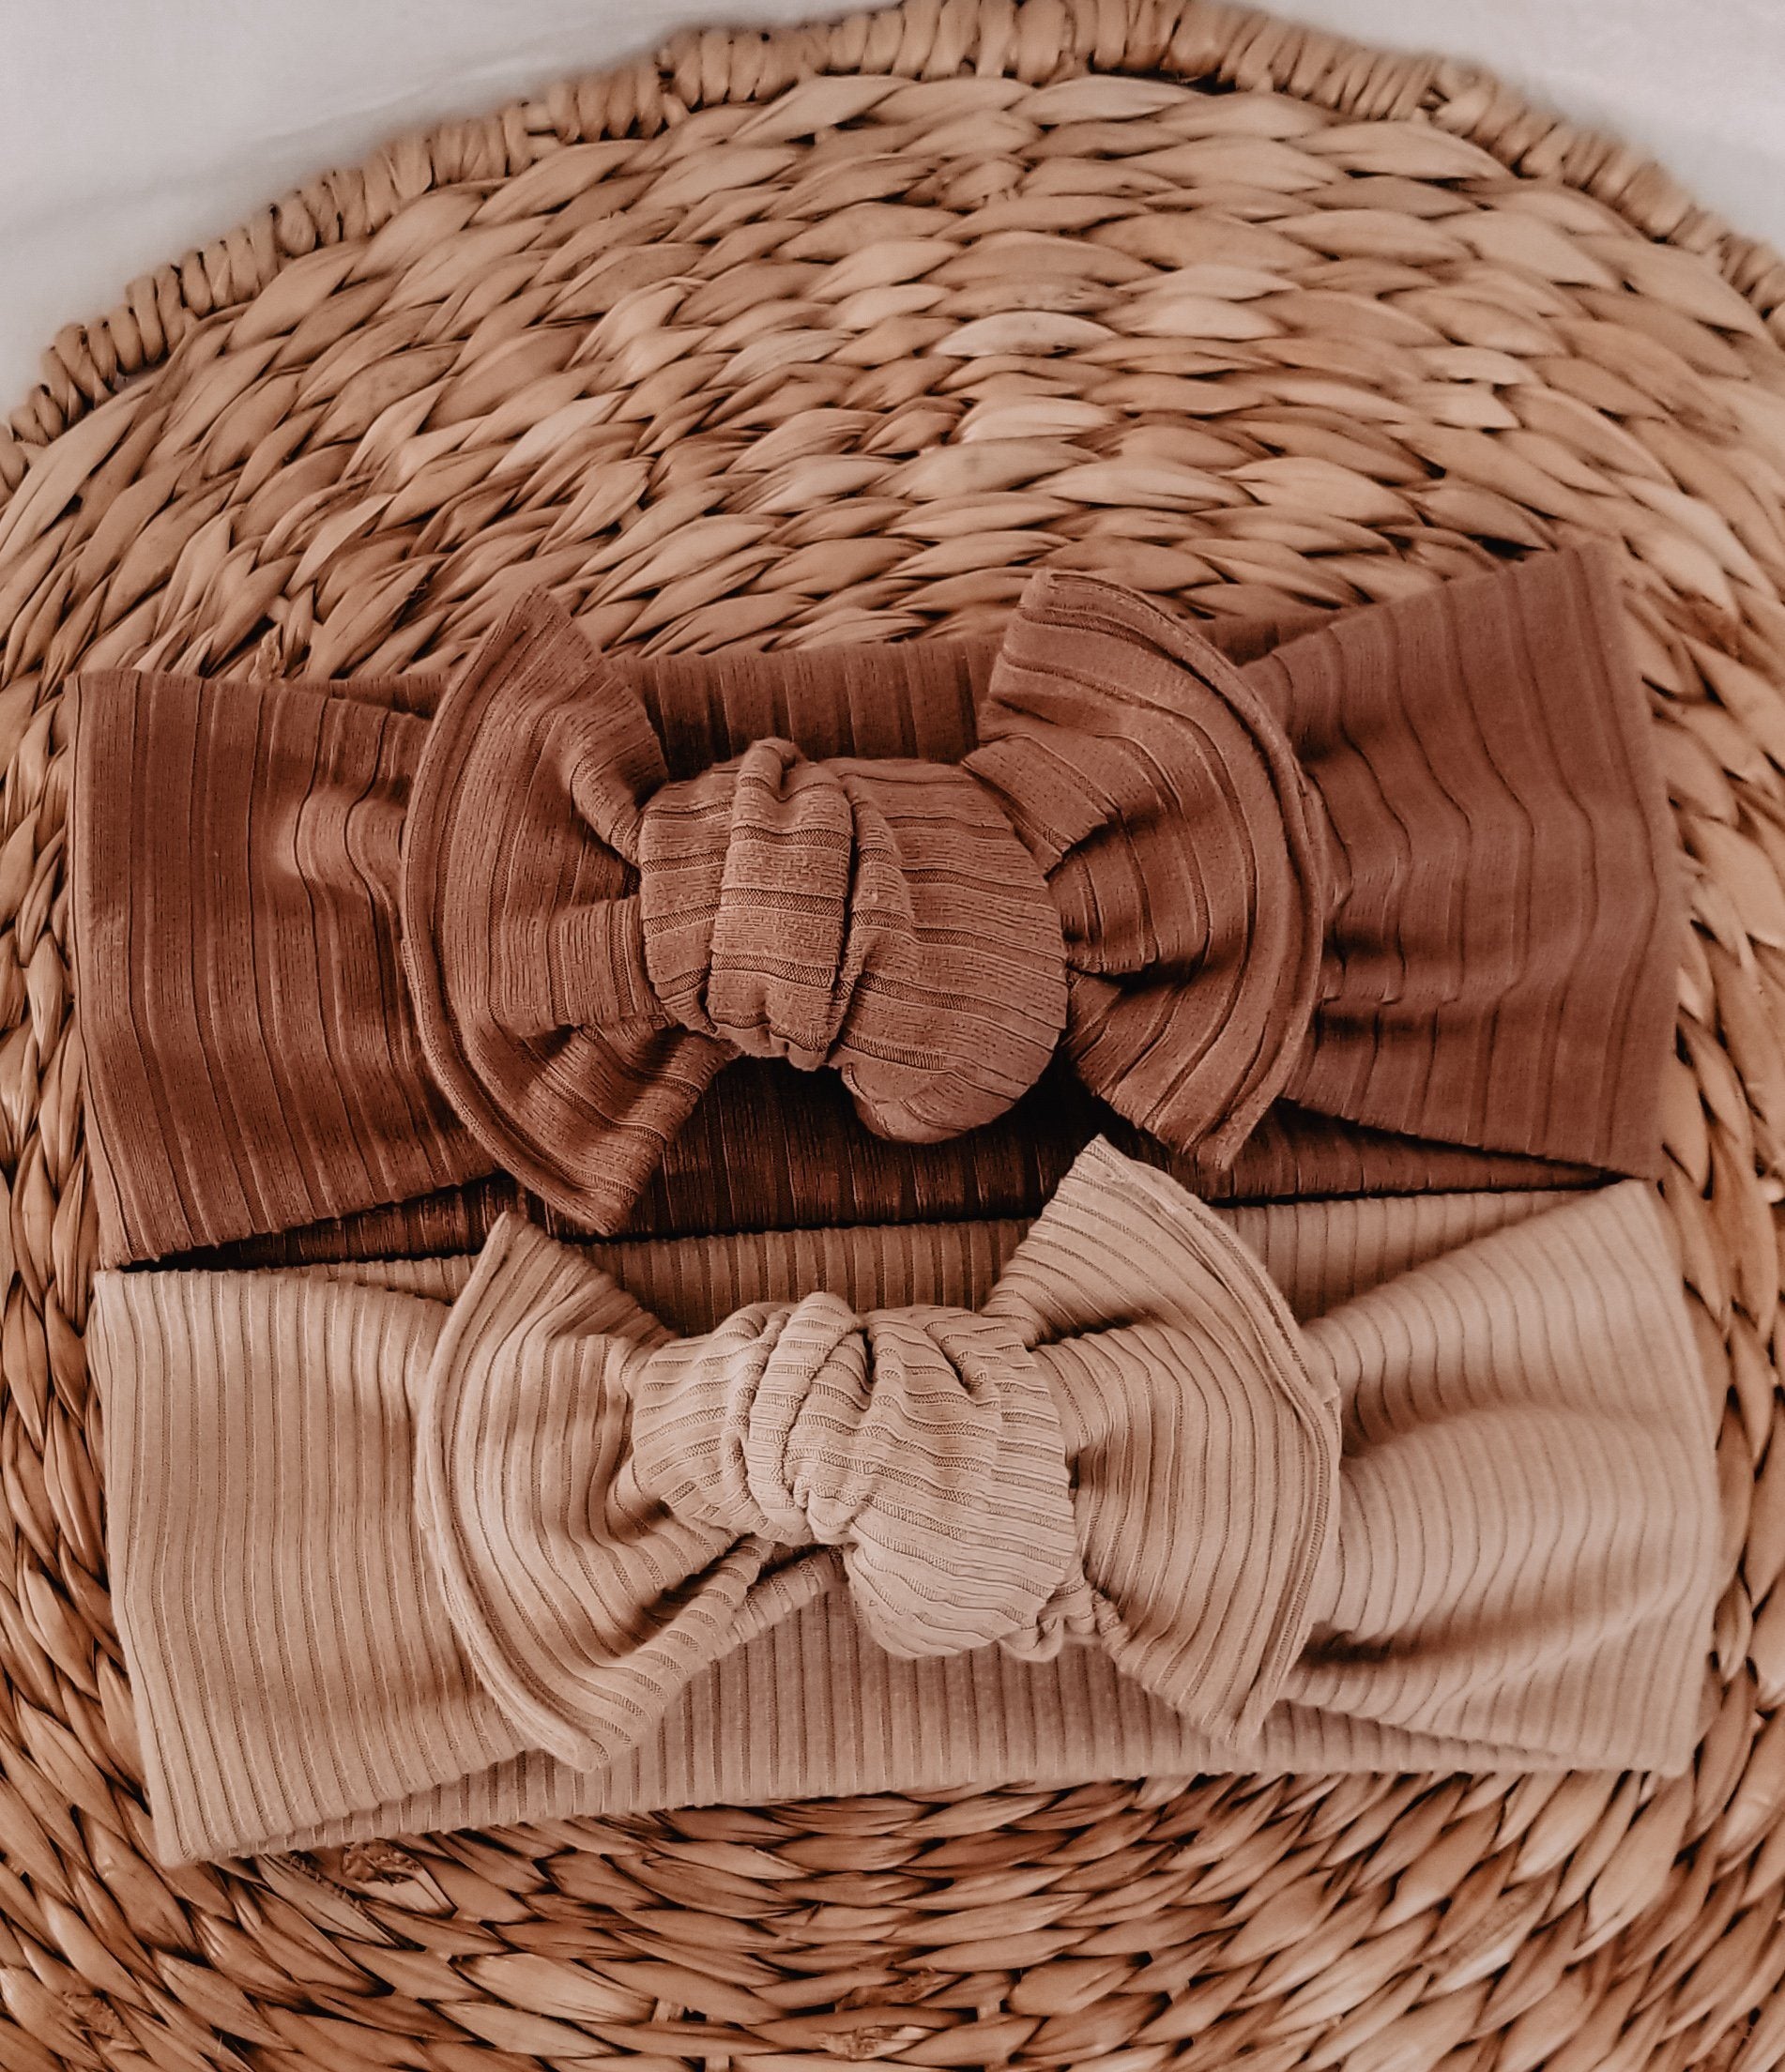 Caffe Mocha Brushed Ribbed // Tie-on Headwrap Tie-on Headwraps Elisa's Little Blossoms - Headwraps 